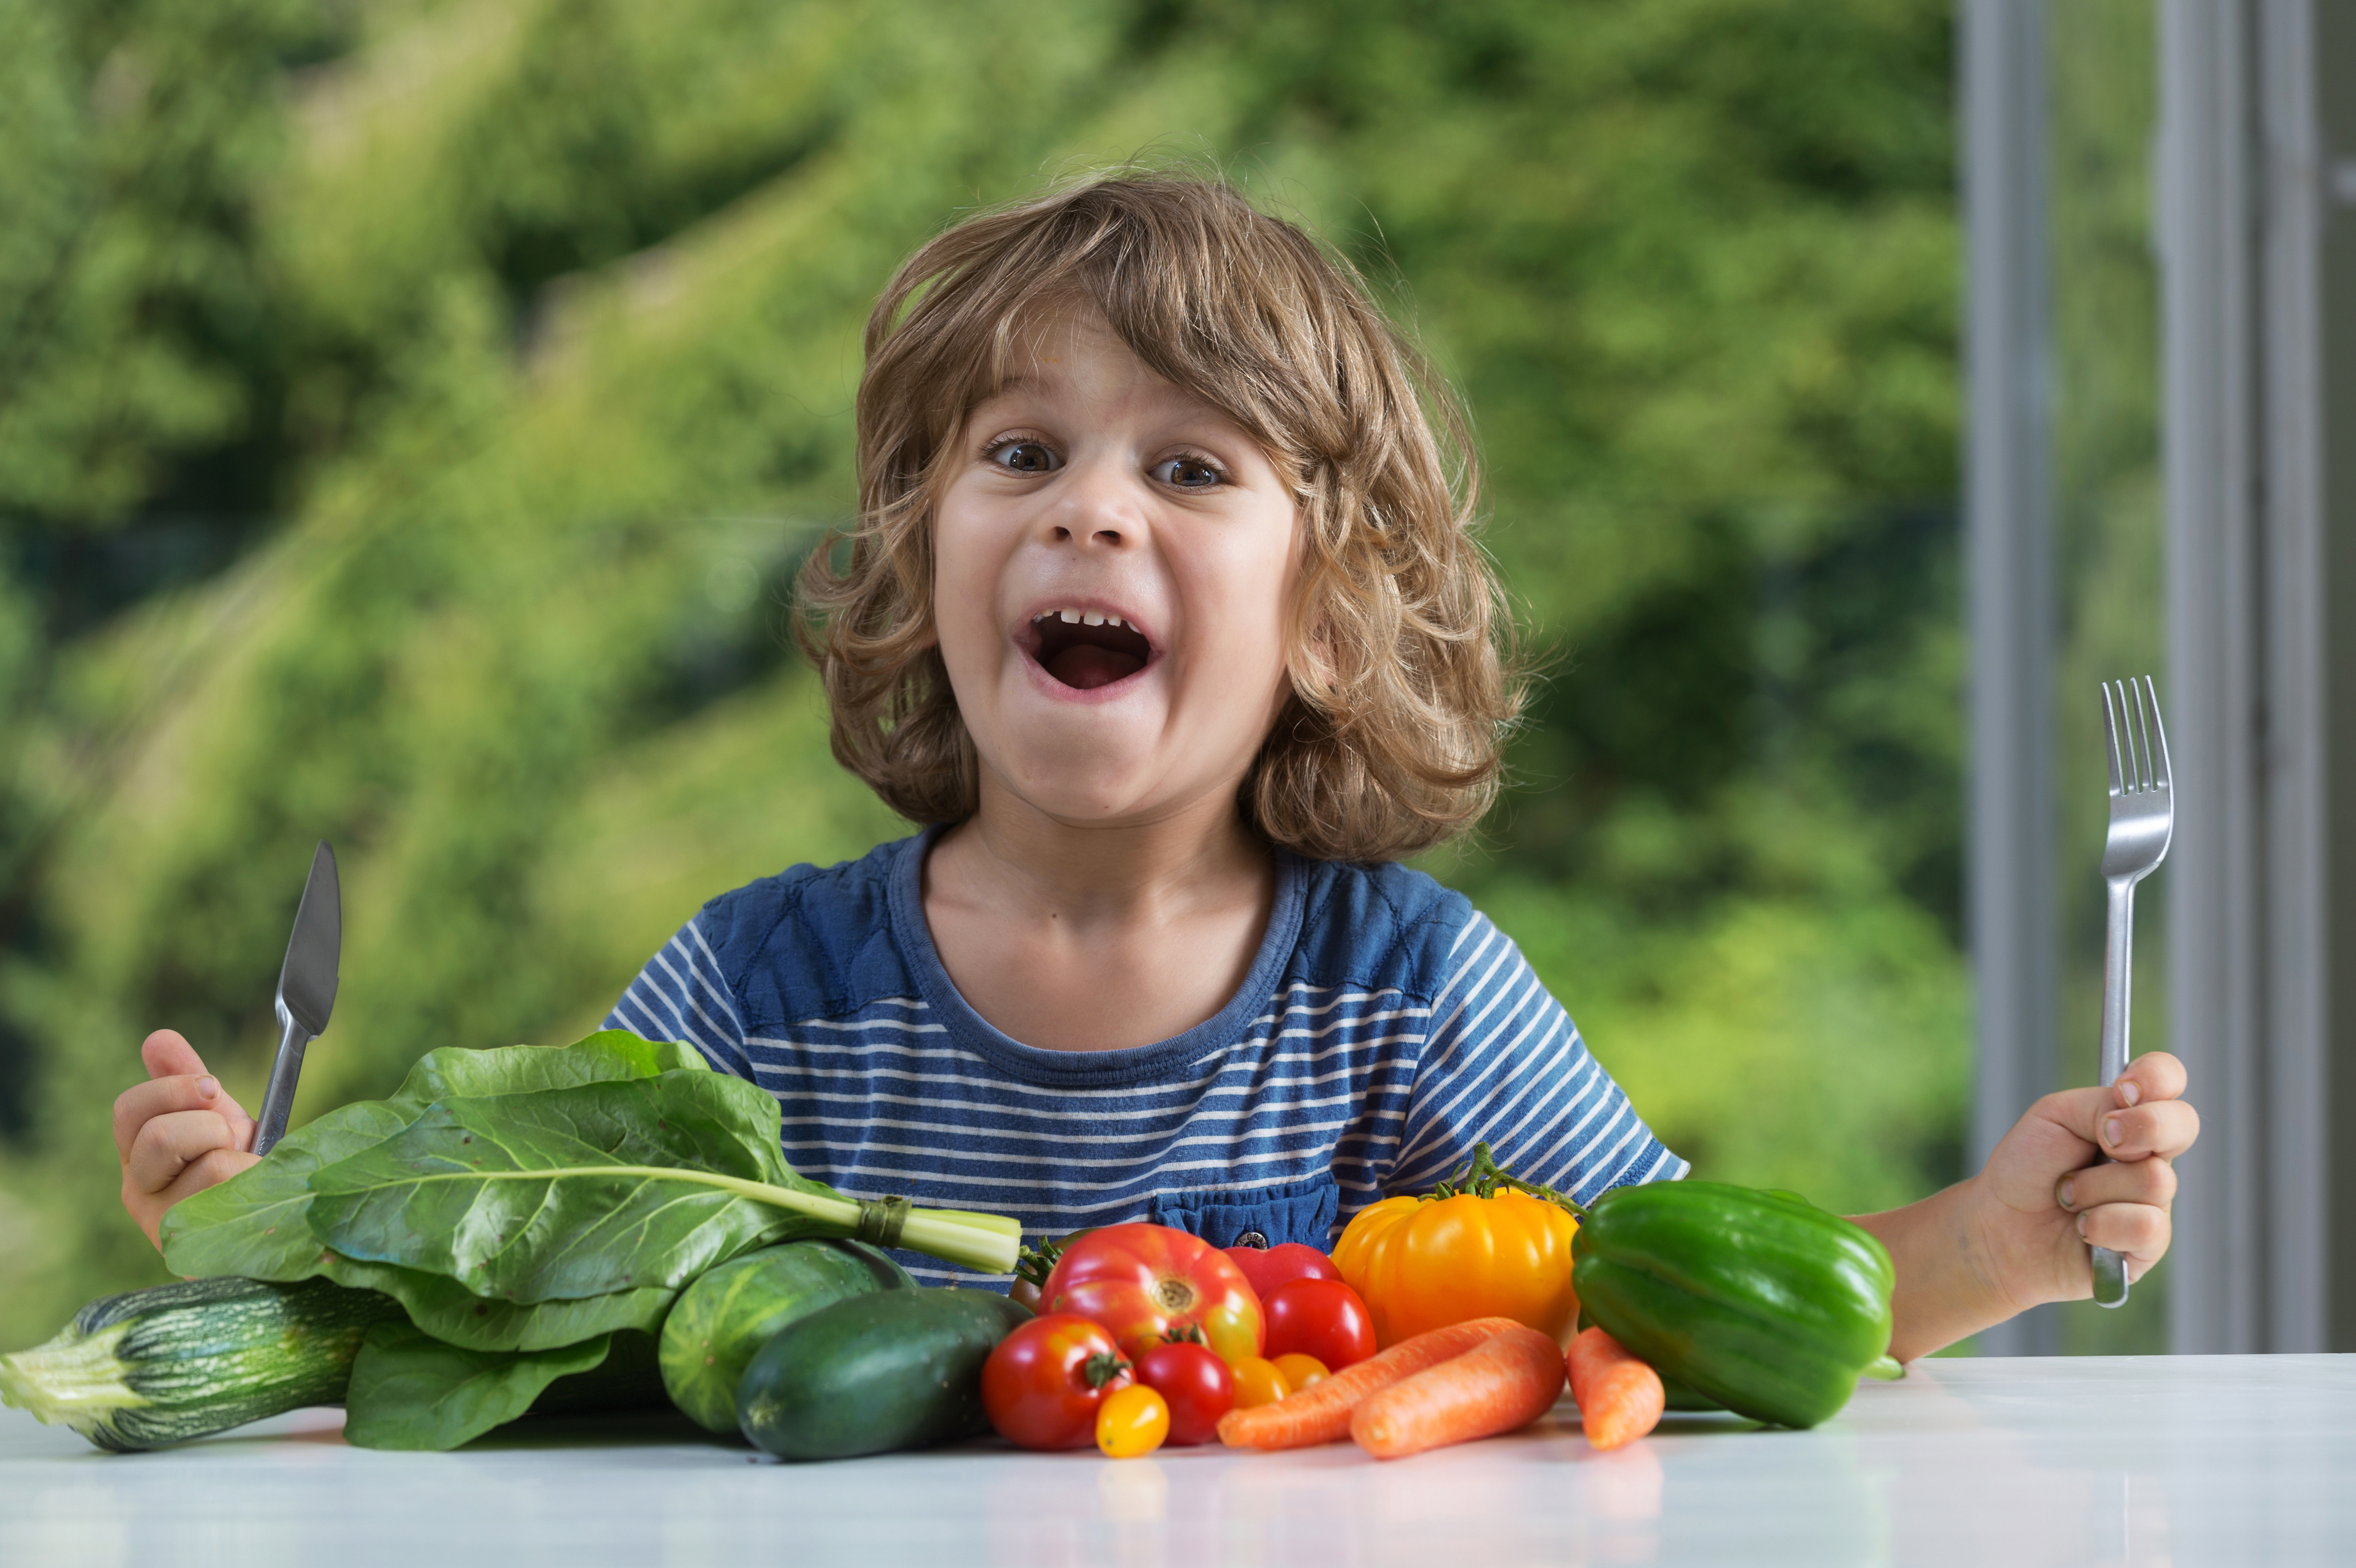 Nuture healthy lifestyle habits in children - Cute little boy sitting at the table excited about vegetable meal, bad or good eating habits, nutrition and healthy eating, showing emotions concept